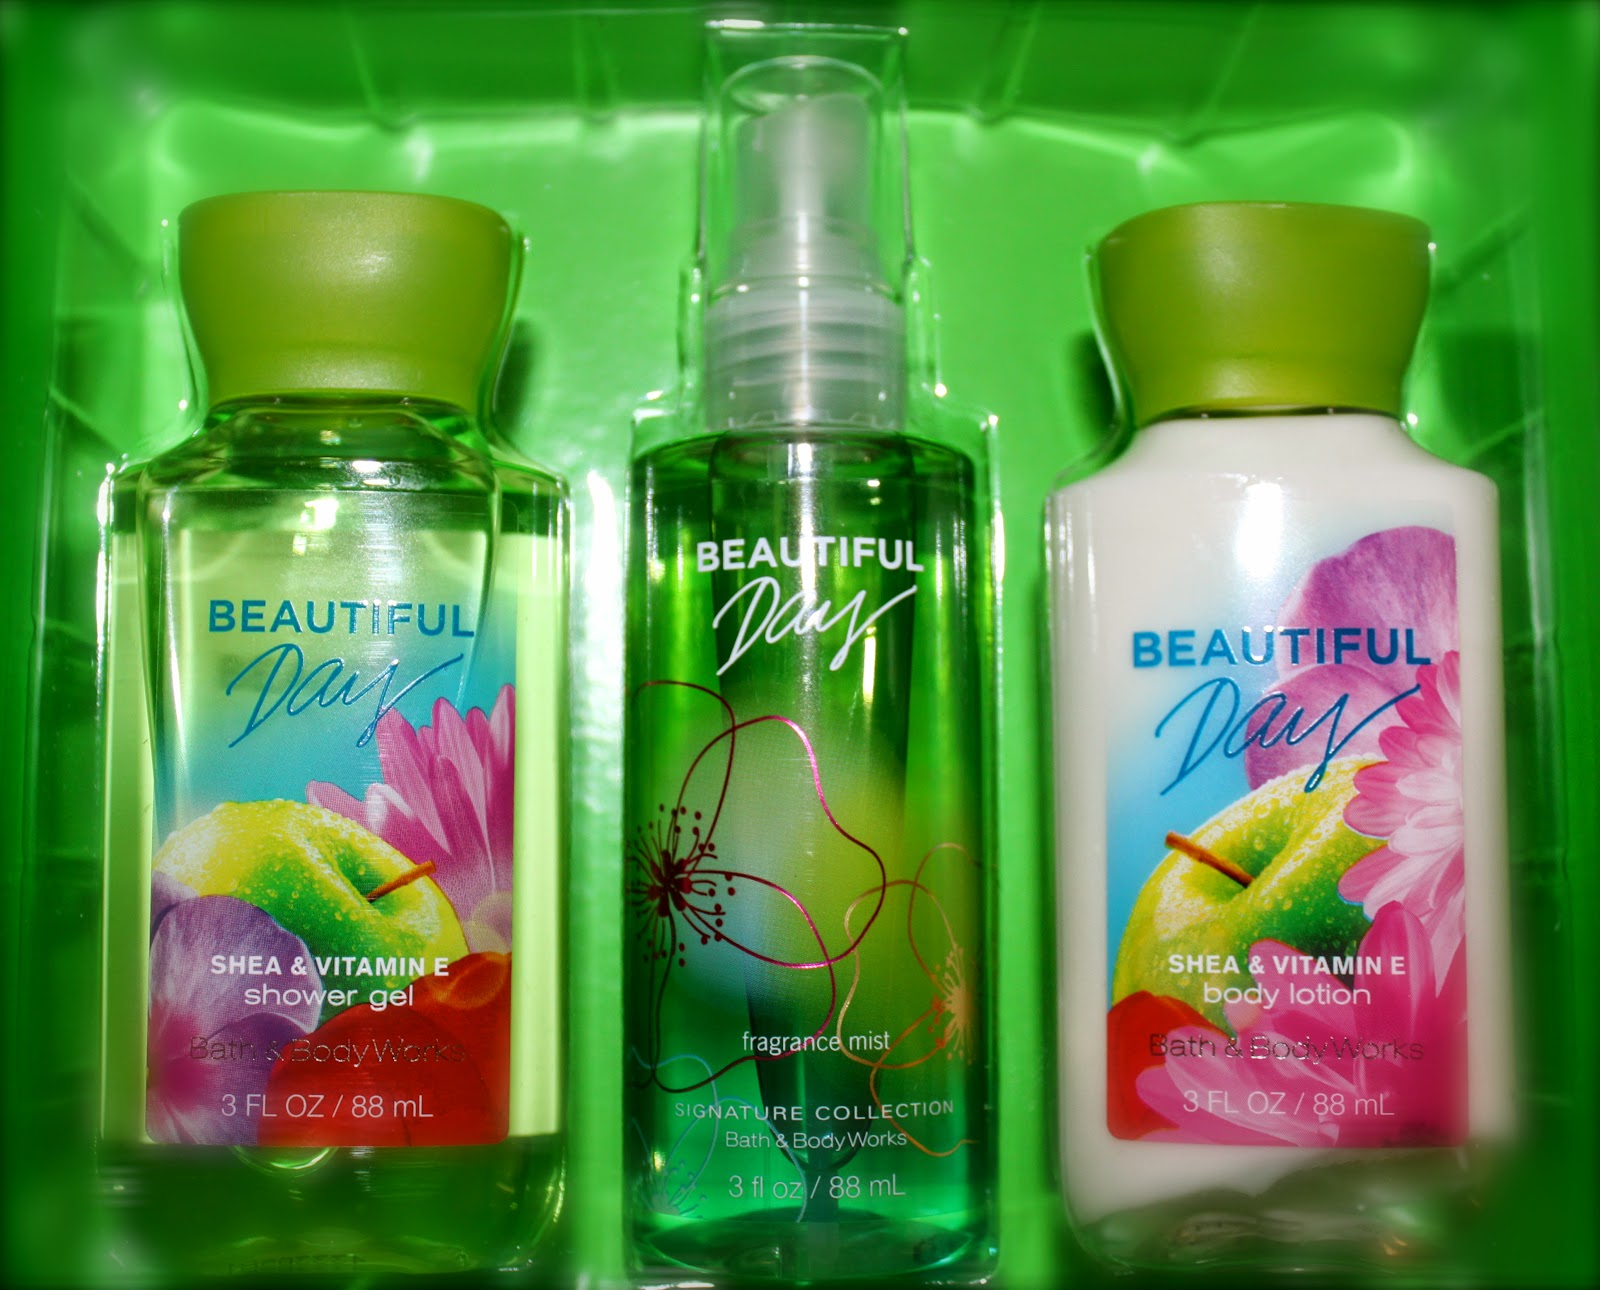 Bath Products: Bath & Body Works: "Beautiful Day" Signature Scent